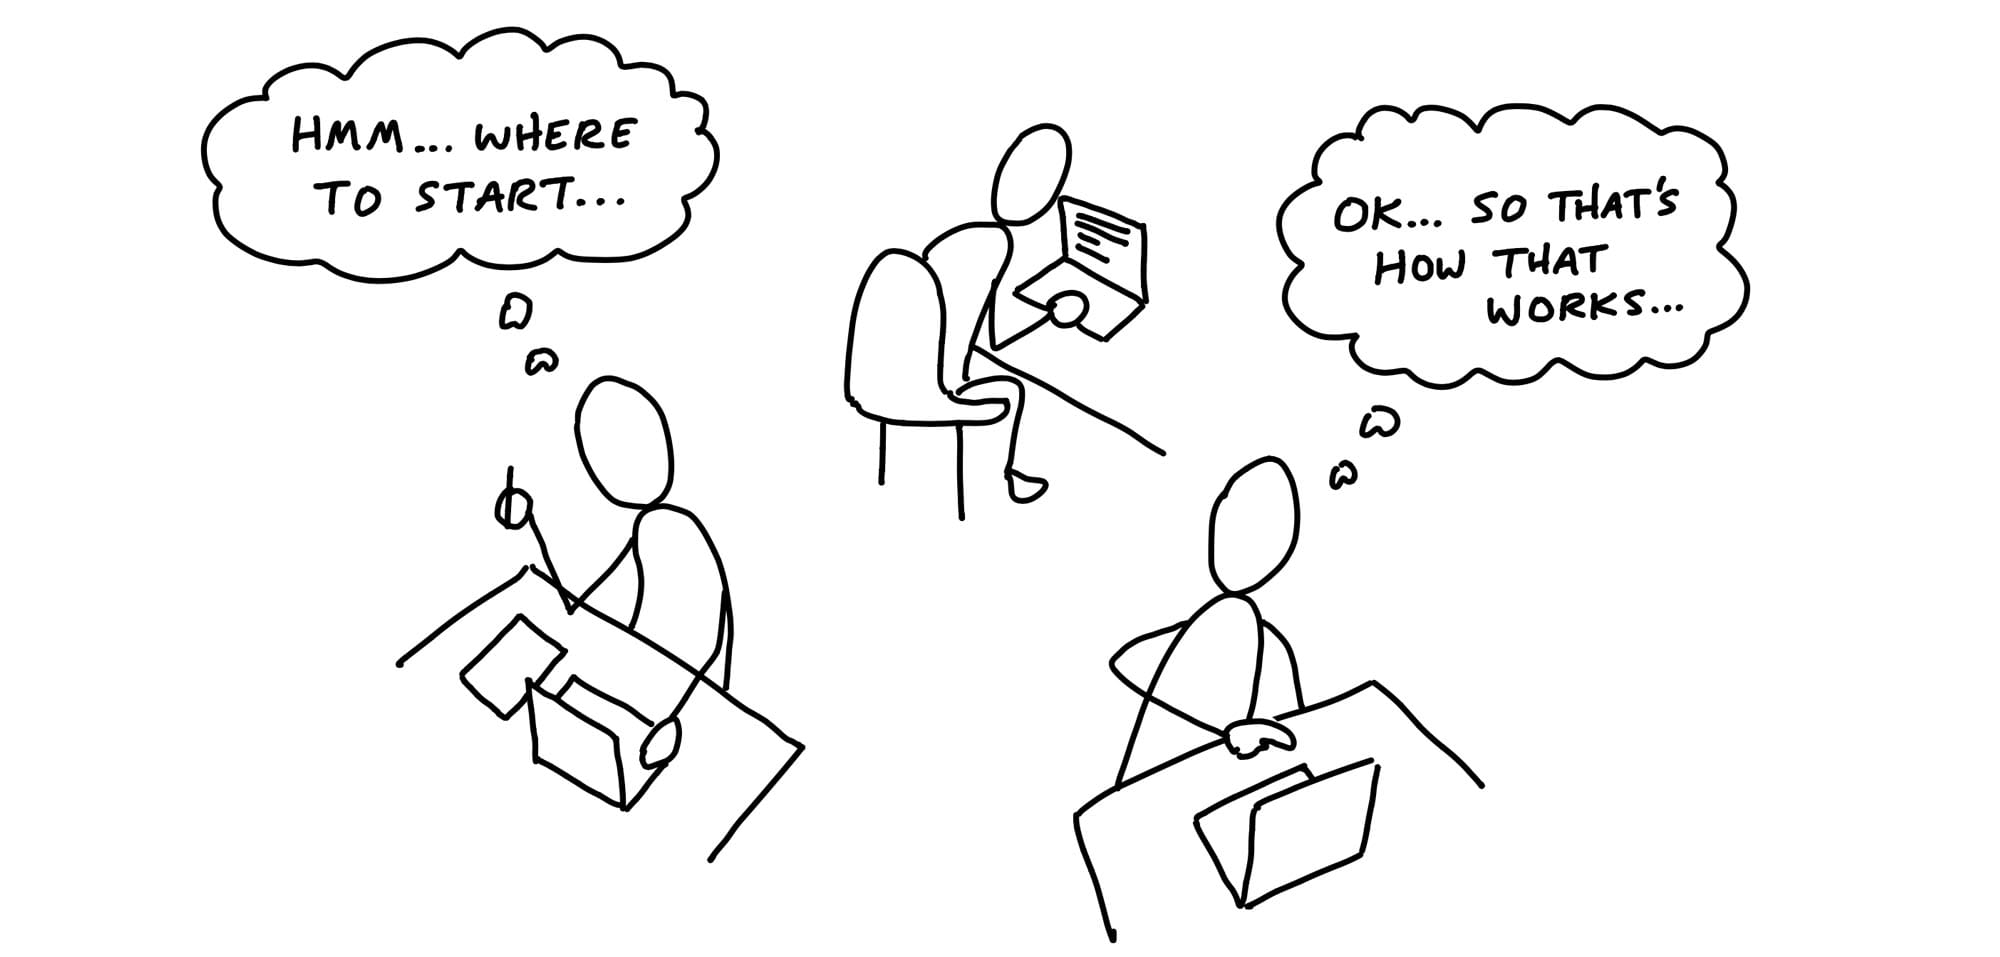 Cartoon. Three figures are seated at their desks, hunching over laptops as if very focused. On the left, one holds a pencil in the air and gazes down at a piece of paper beside the laptop. A thought bubble says: Hmm... Where to start. On the right, another figure points to the laptop and leans forward, thinking: OK... so that's how that works.